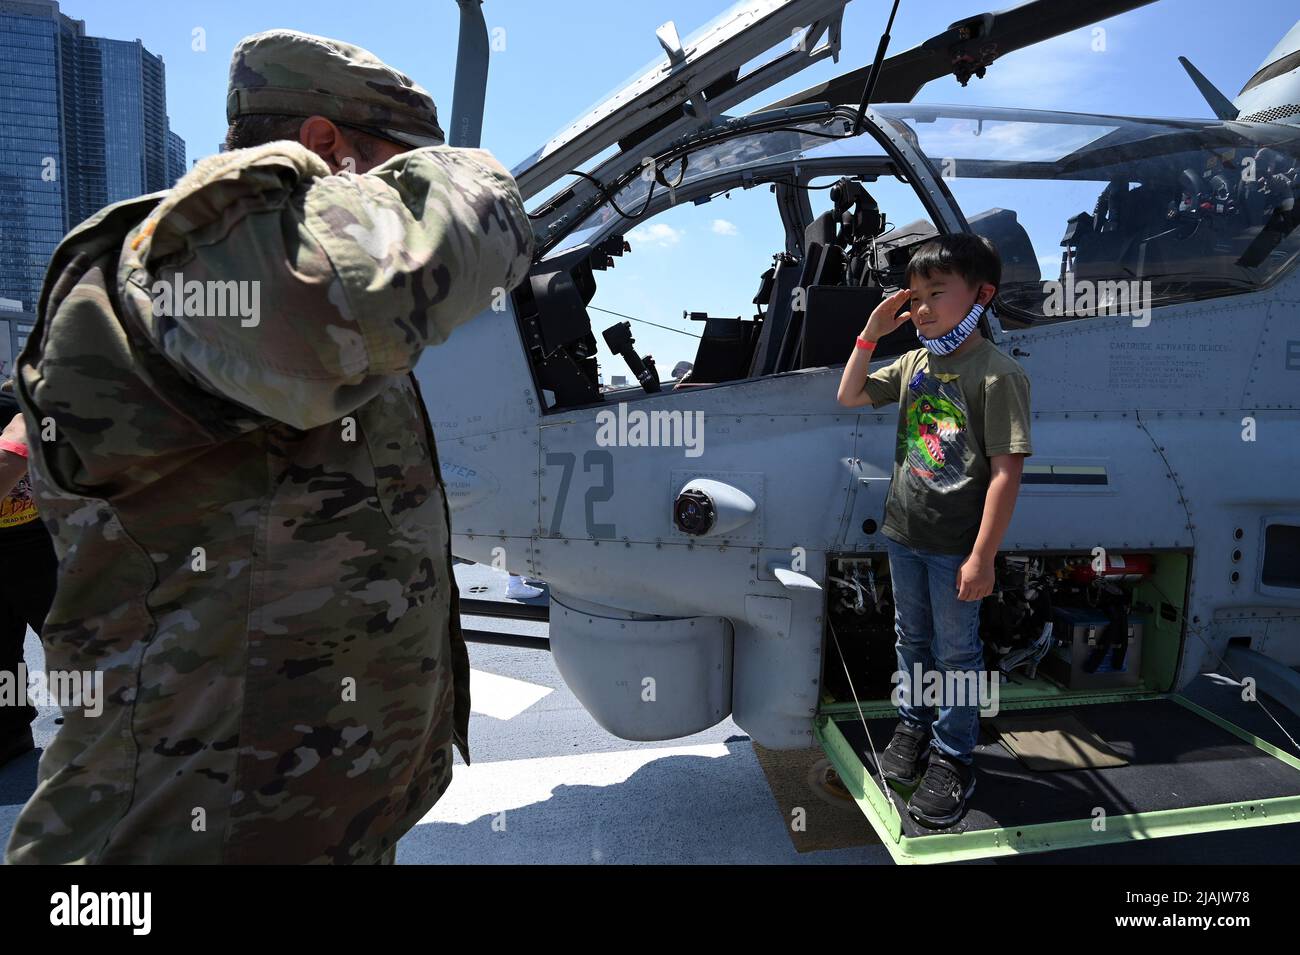 New York, USA. 30th May, 2022. Teddy Oh, 7, salutes as he stands next to a Navy Cobra attack helicpter on flight deck of the Nay's USS Bataan (LHD-5) Wasp-class amphibious assault ship on Memorial Day, New York, NY, May 30, 2022. The USS Bataan and other vessels participated in Fleet Week which returned this year for the first time since the start of the COVID-19 Pandemic. (Photo by Anthony Behar/Sipa USA) Credit: Sipa USA/Alamy Live News Stock Photo